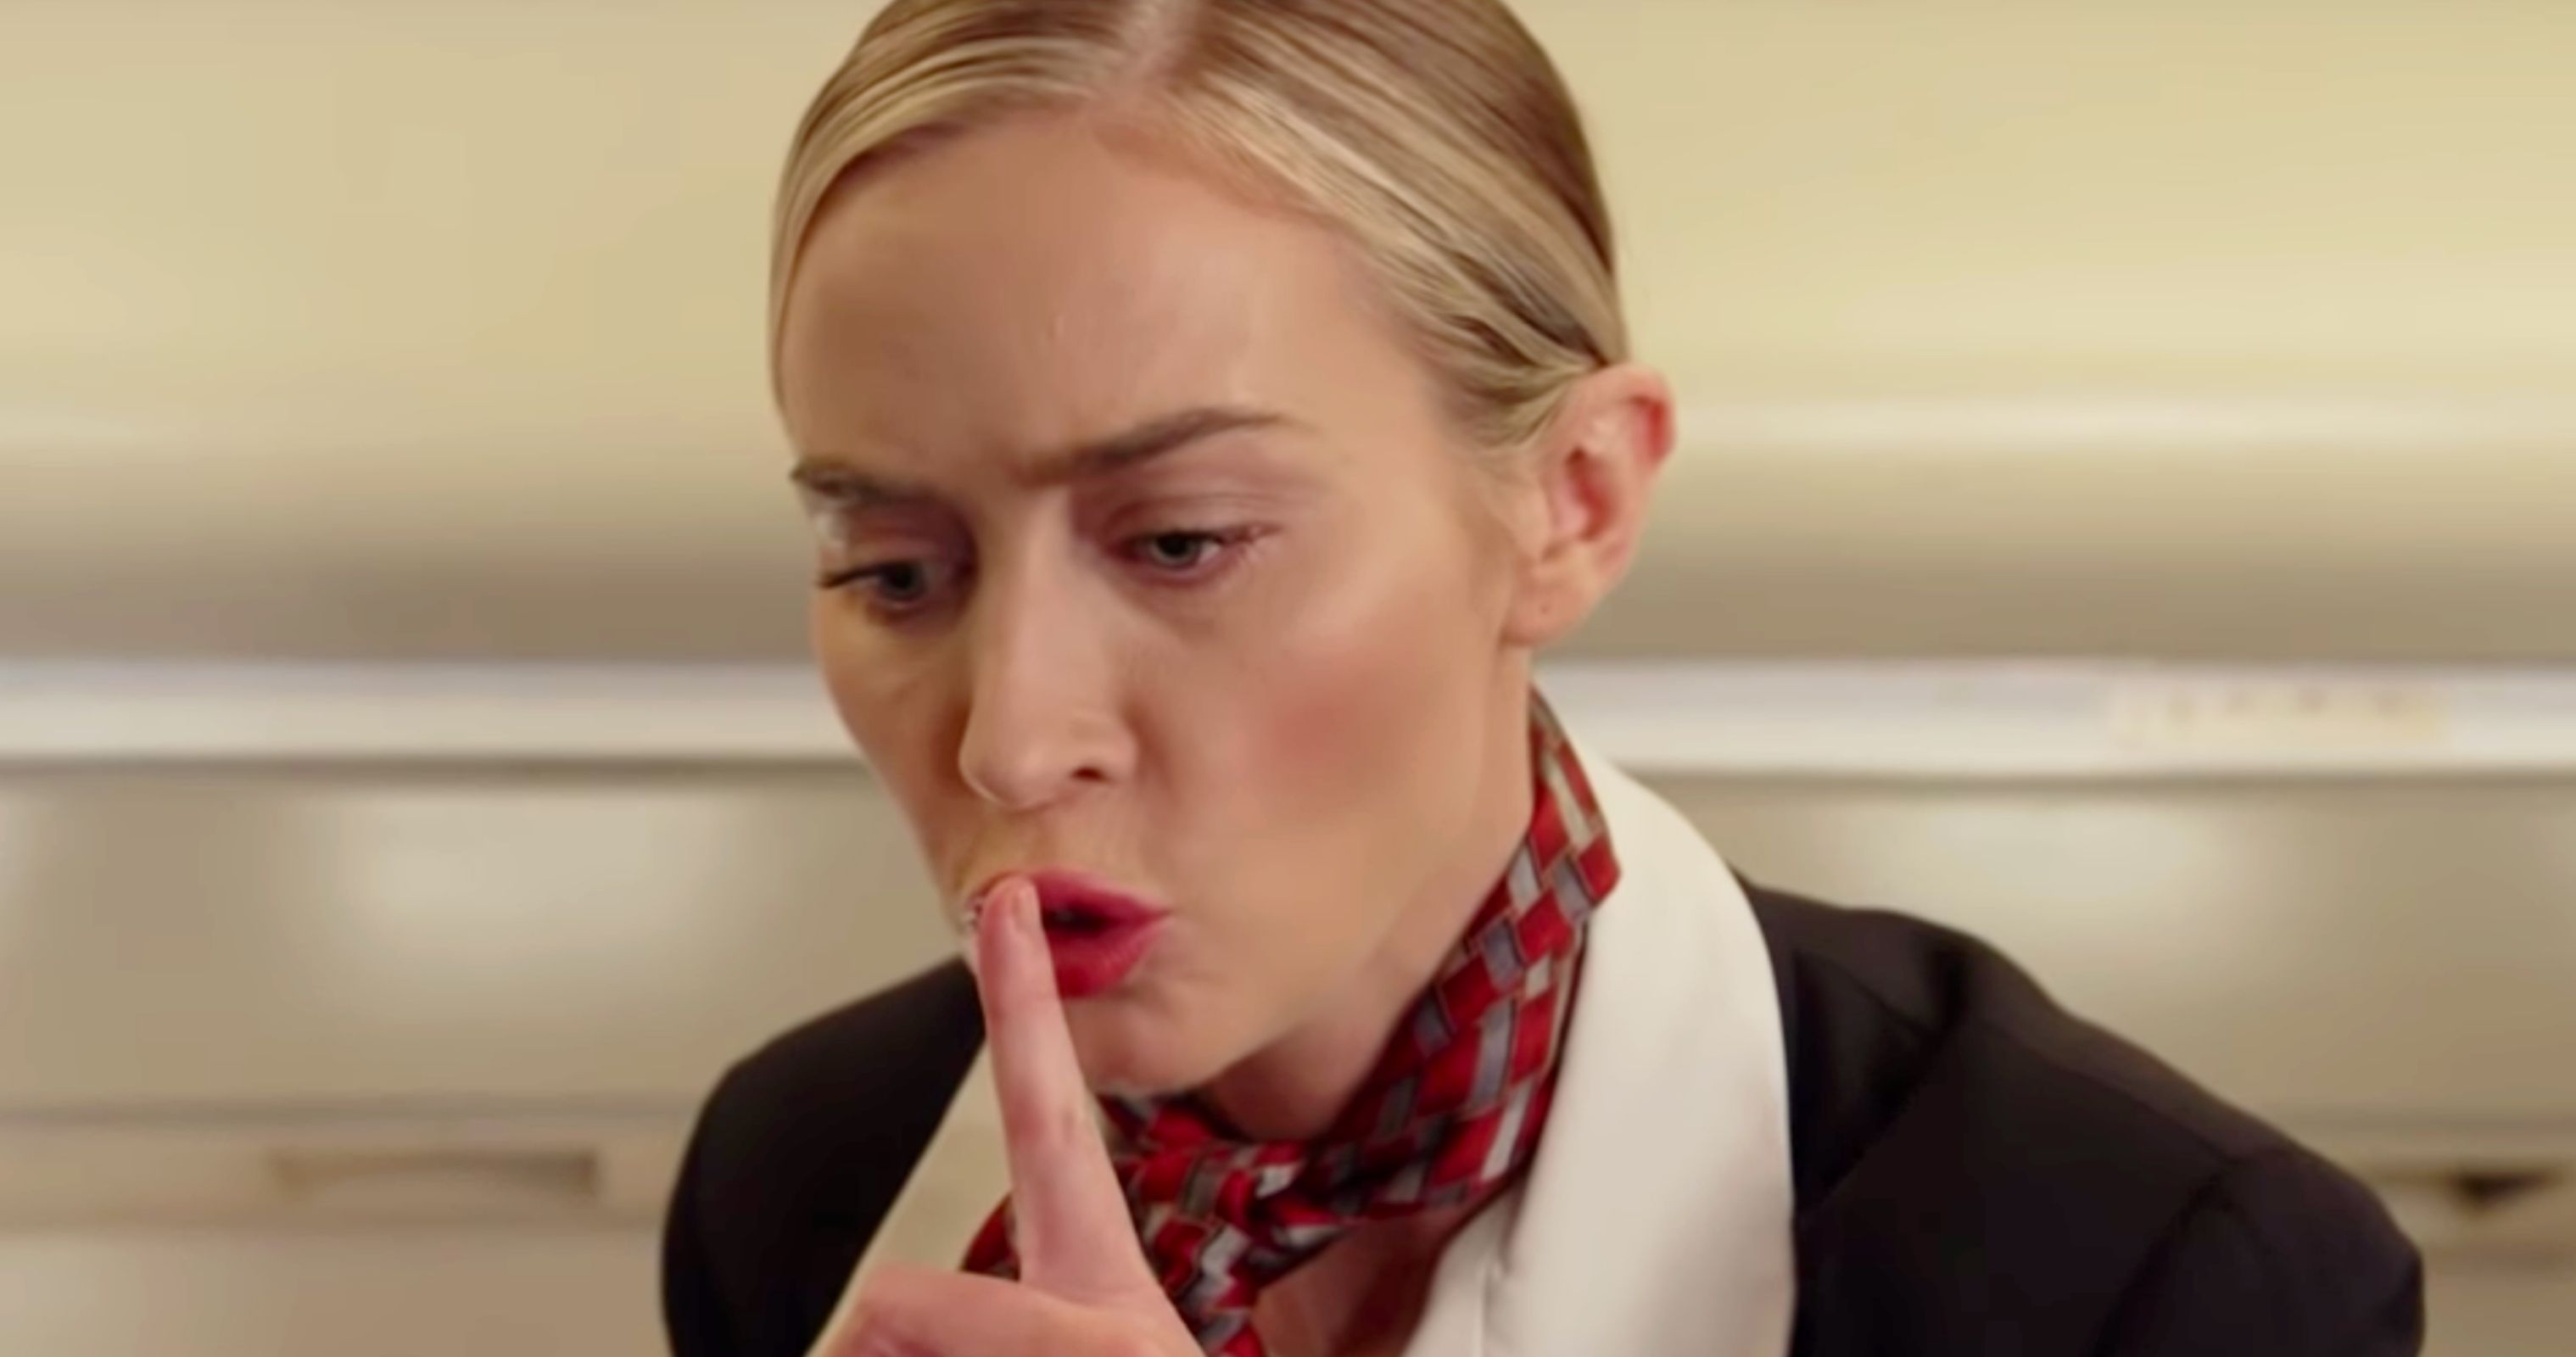 A Quiet Place Gets Spoofed in Emily Blunt's Hilarious A Quiet Plane Video